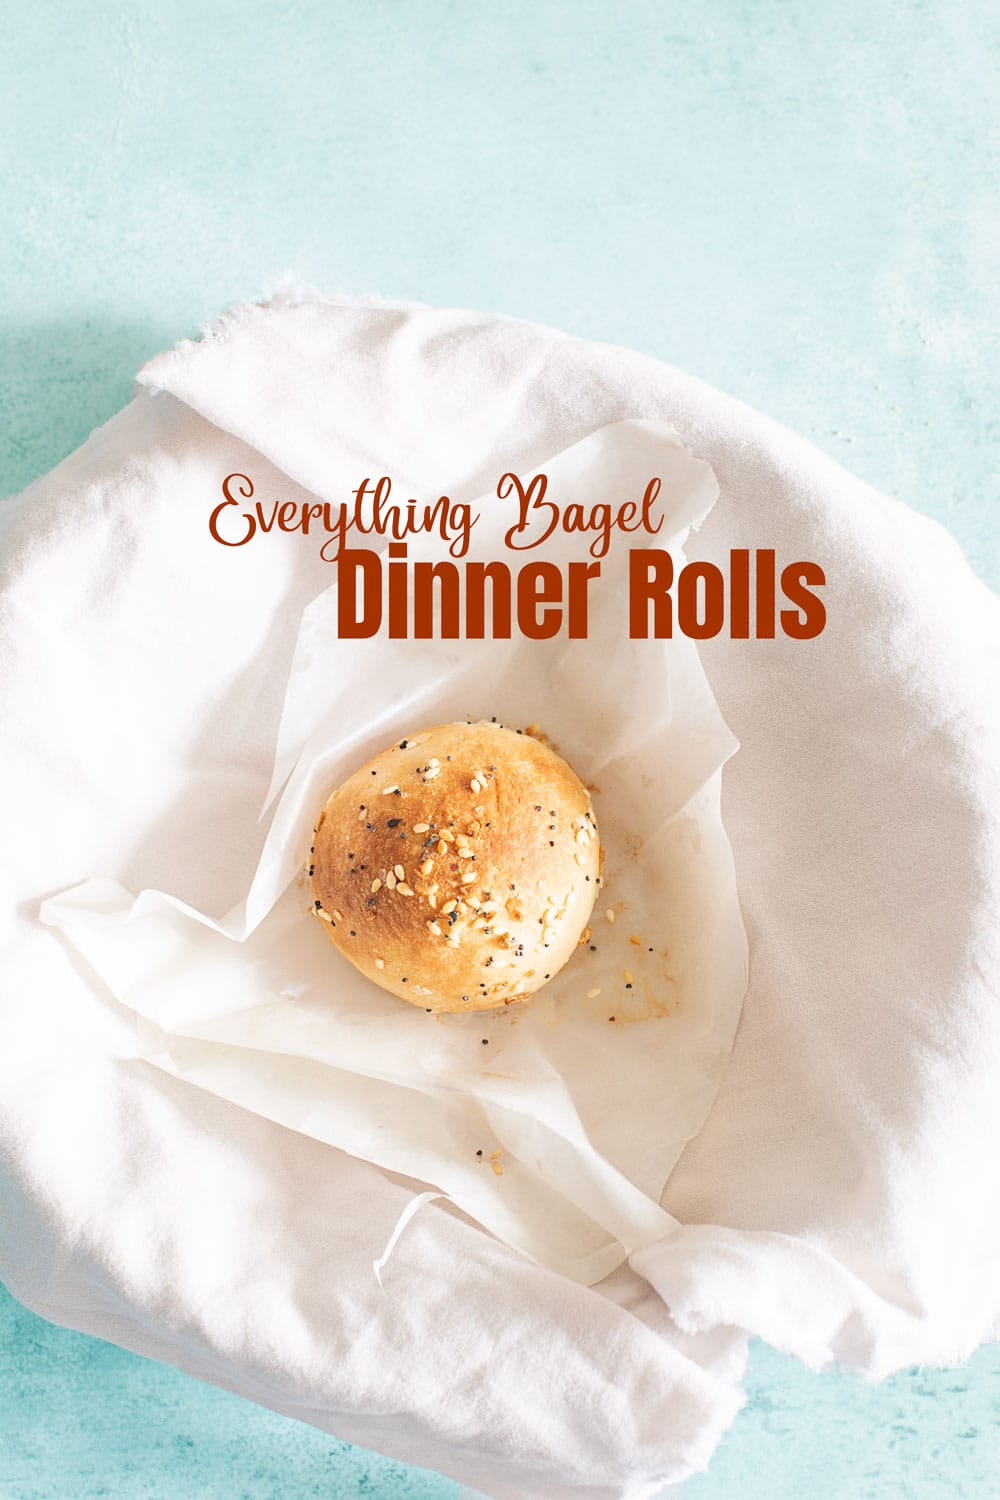 Top view of a single vegan dinner roll on a white wax paper and placed in a bowl with a white tea towel